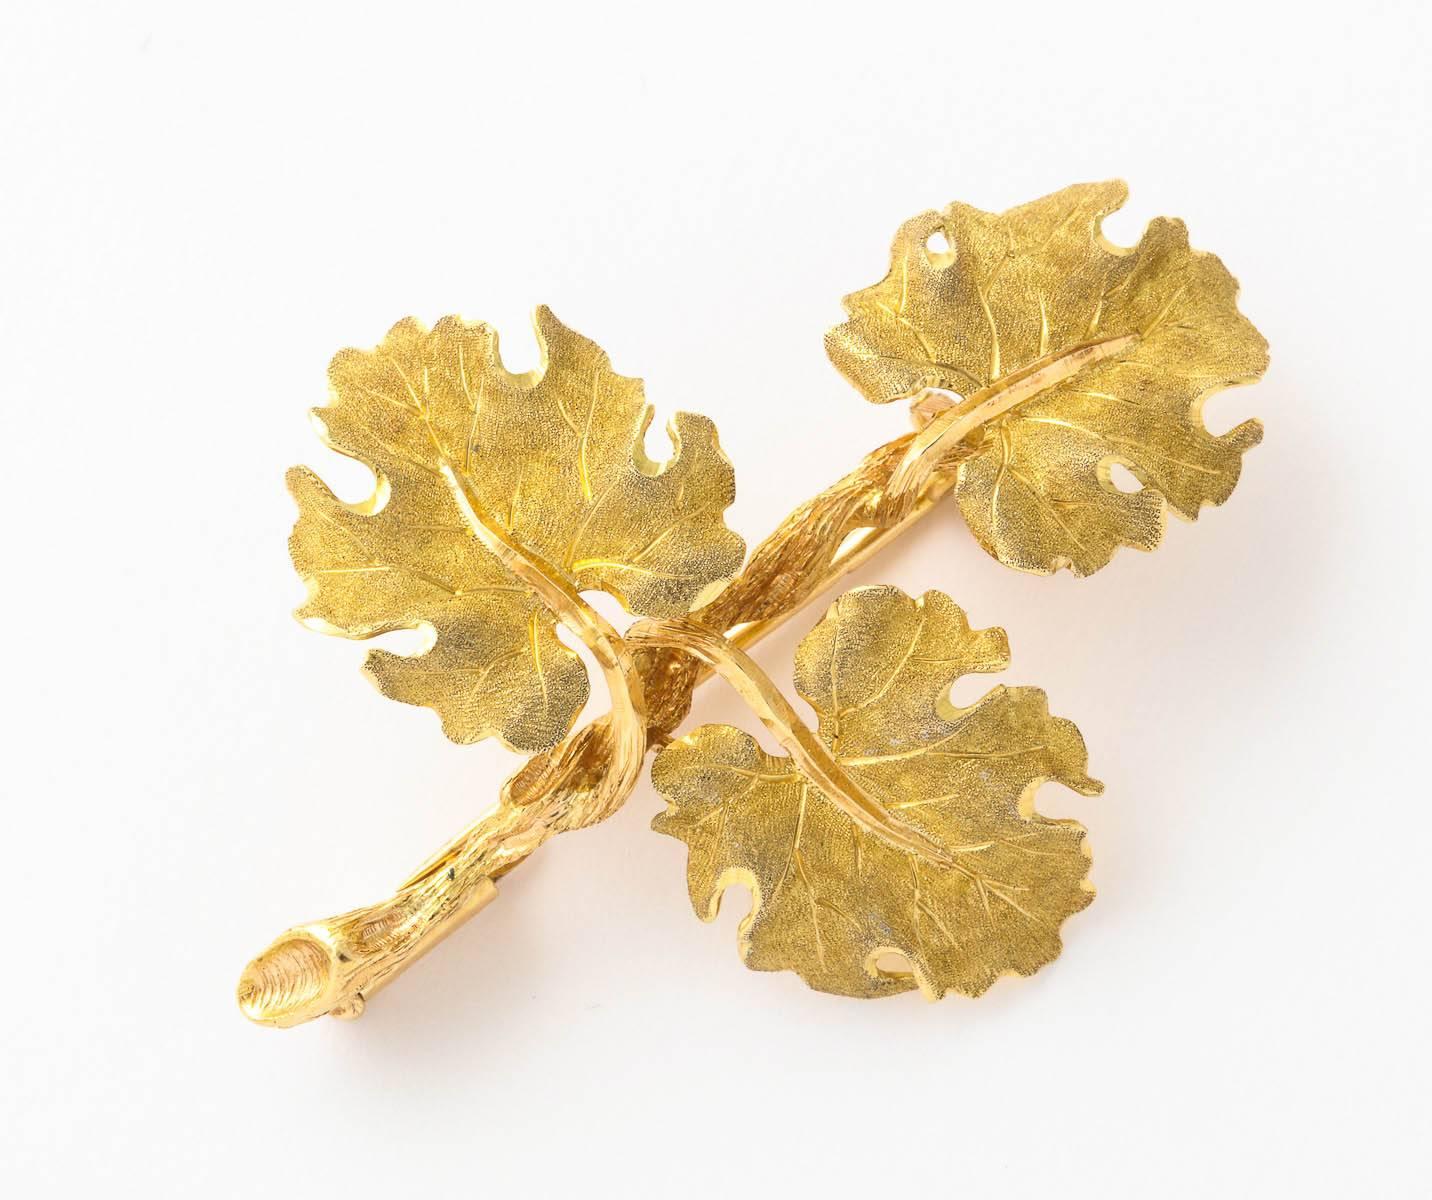 Buccellati 18k yellow gold textured leaves on vine like stems
1 3/4 inch long
1 1/4 inch wide
6.7 grams

